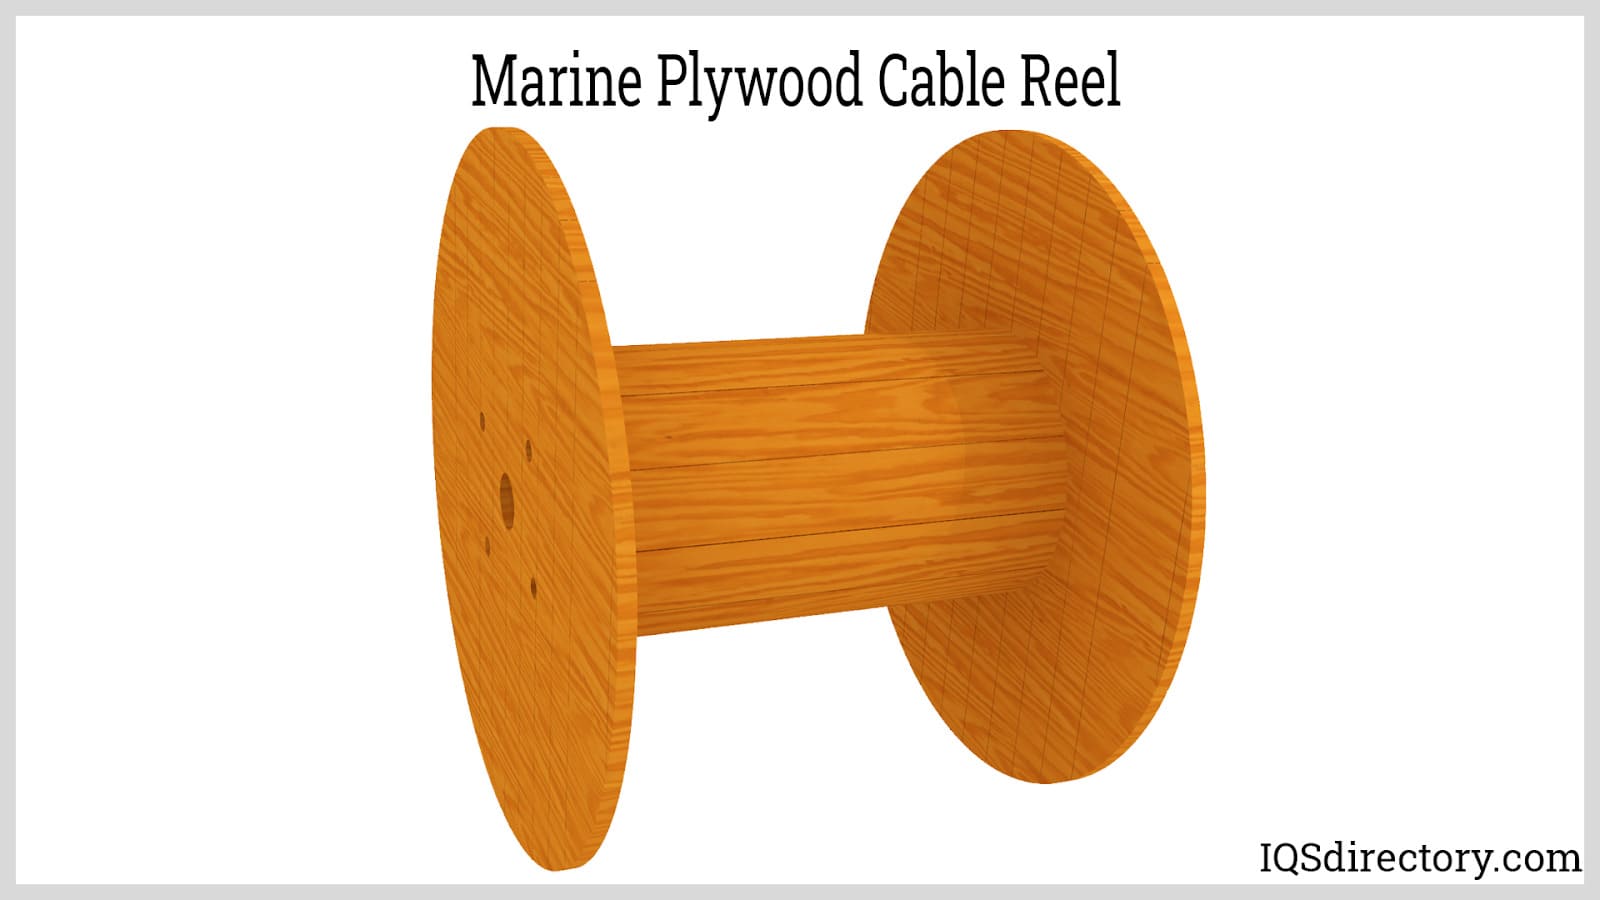 Marine Plywood Cable Reel